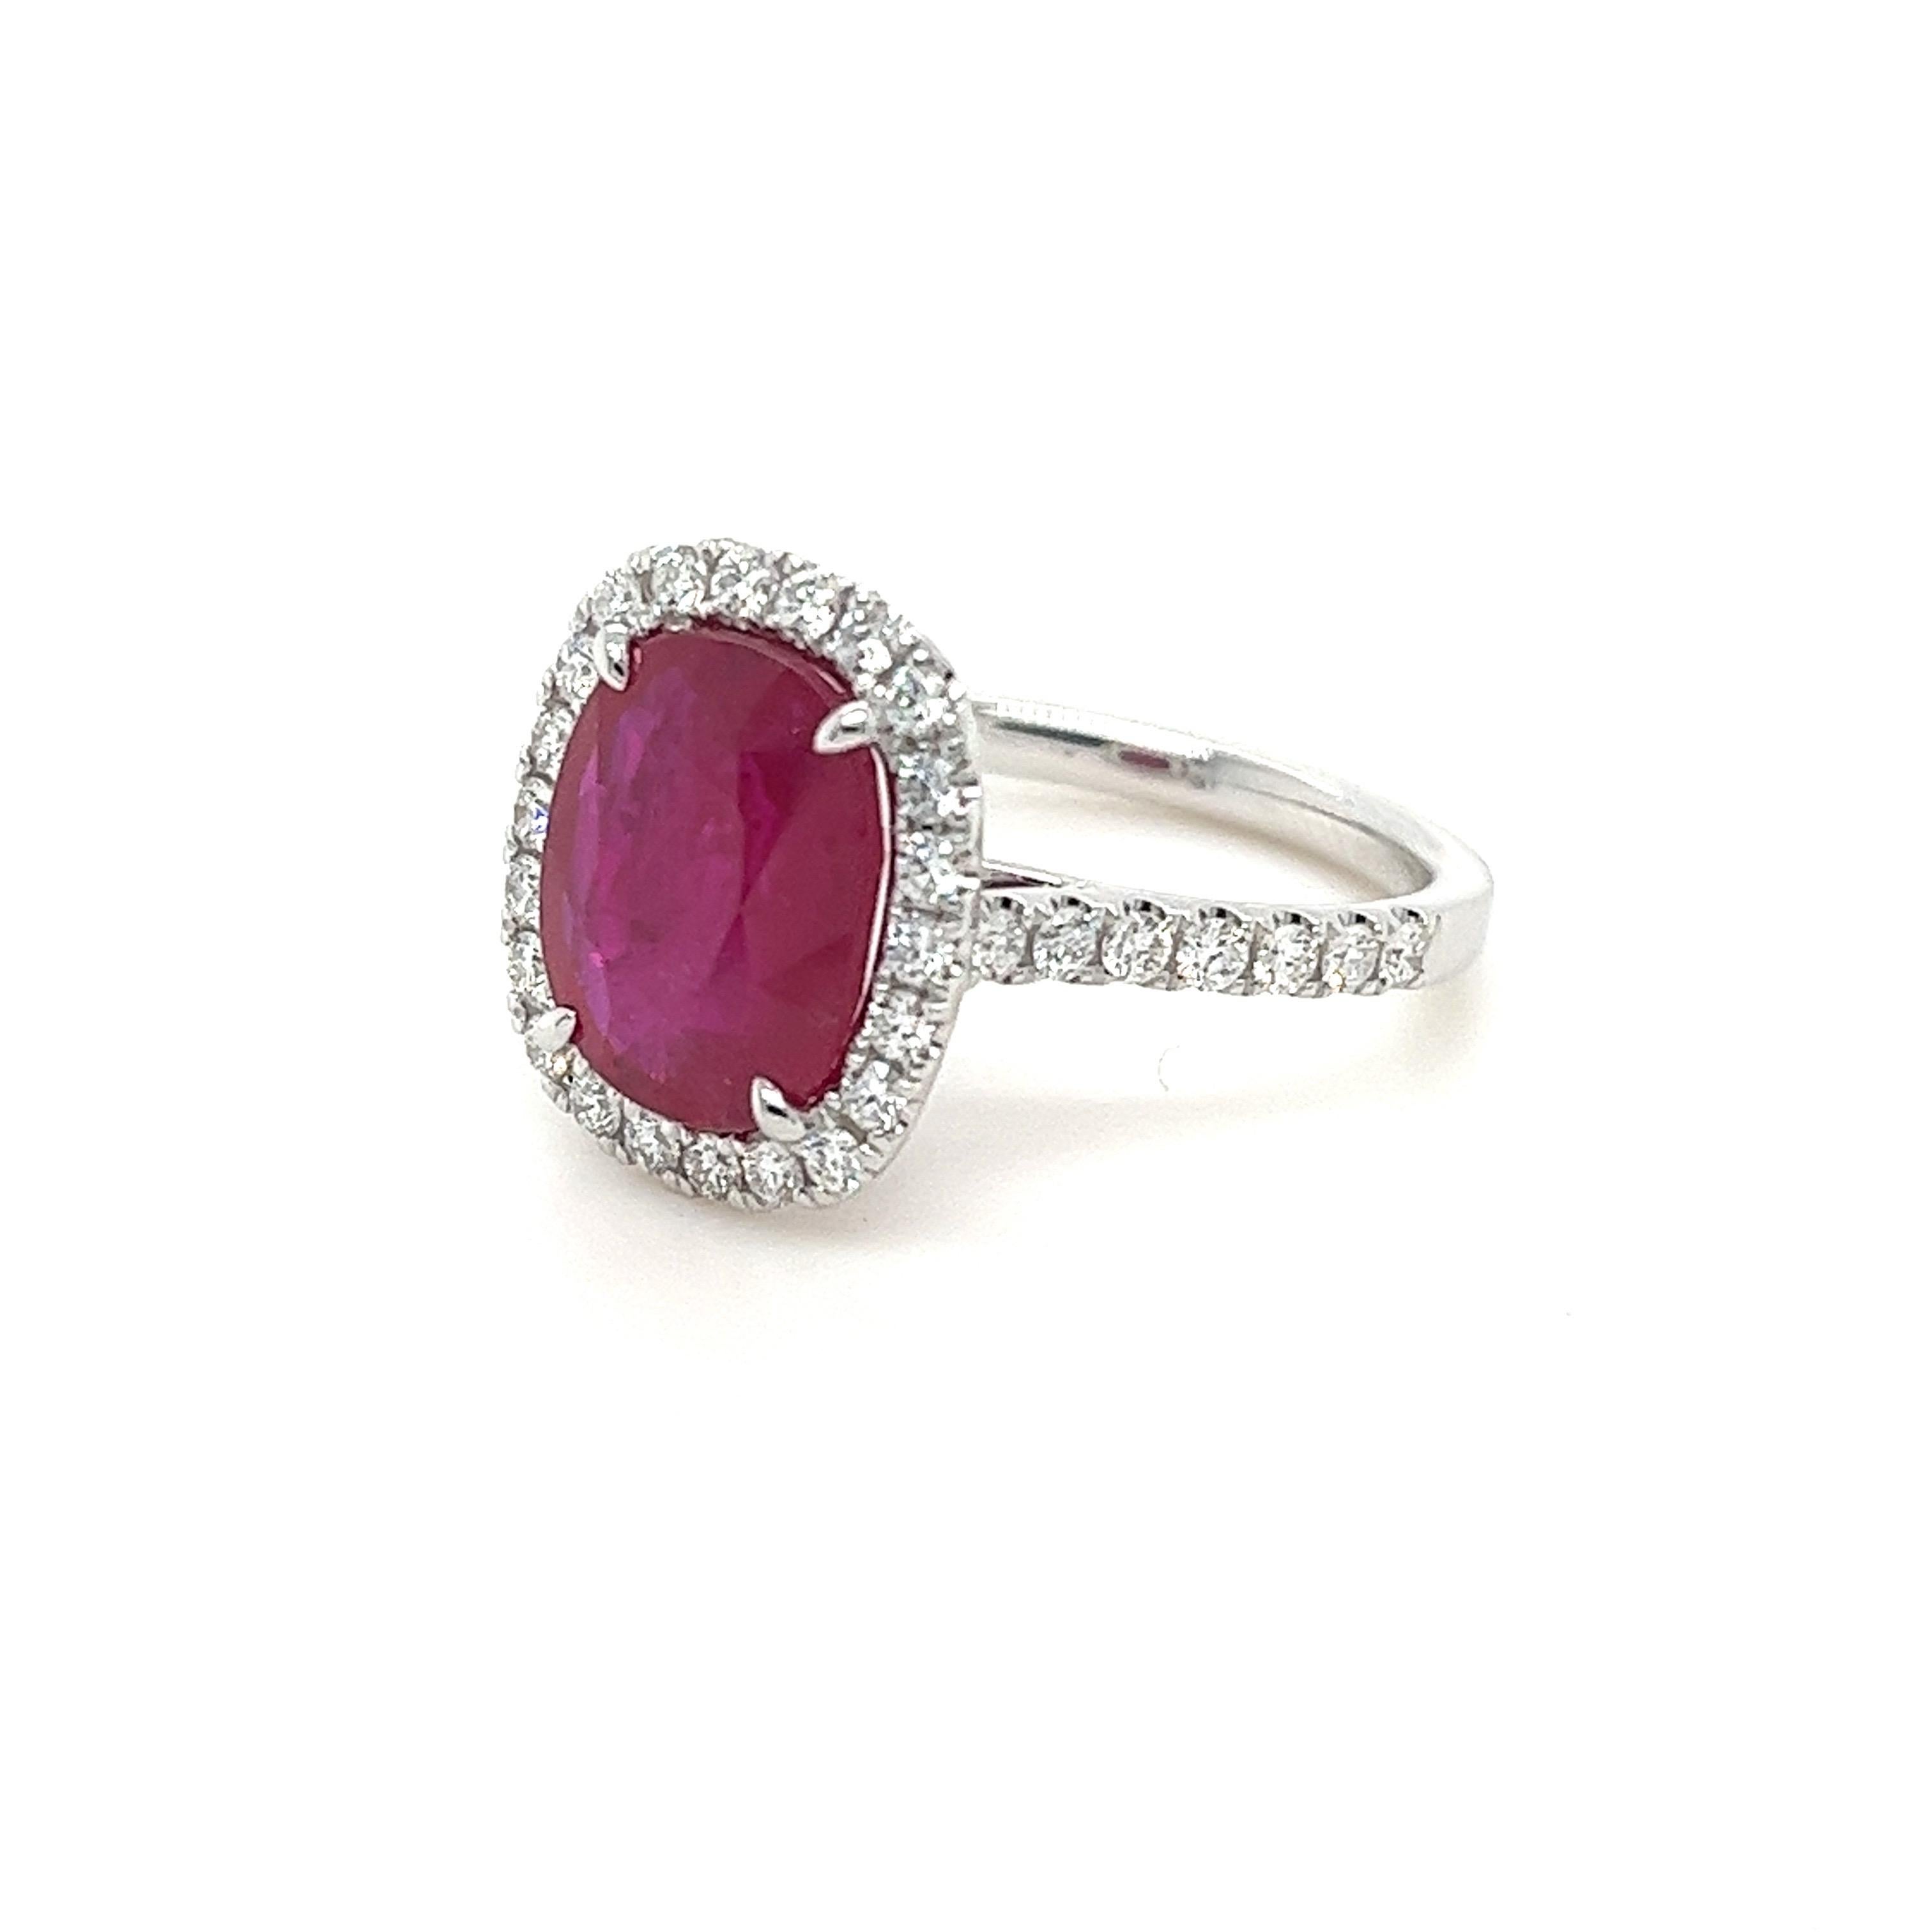 Certified Cushion Mozambique Ruby weighing 4.38 carats
Measuring (11.06x9.04x4.24) mm
Diamonds weighing .61 carats
G-SI1
Set in 18k white gold ring
4.36 g